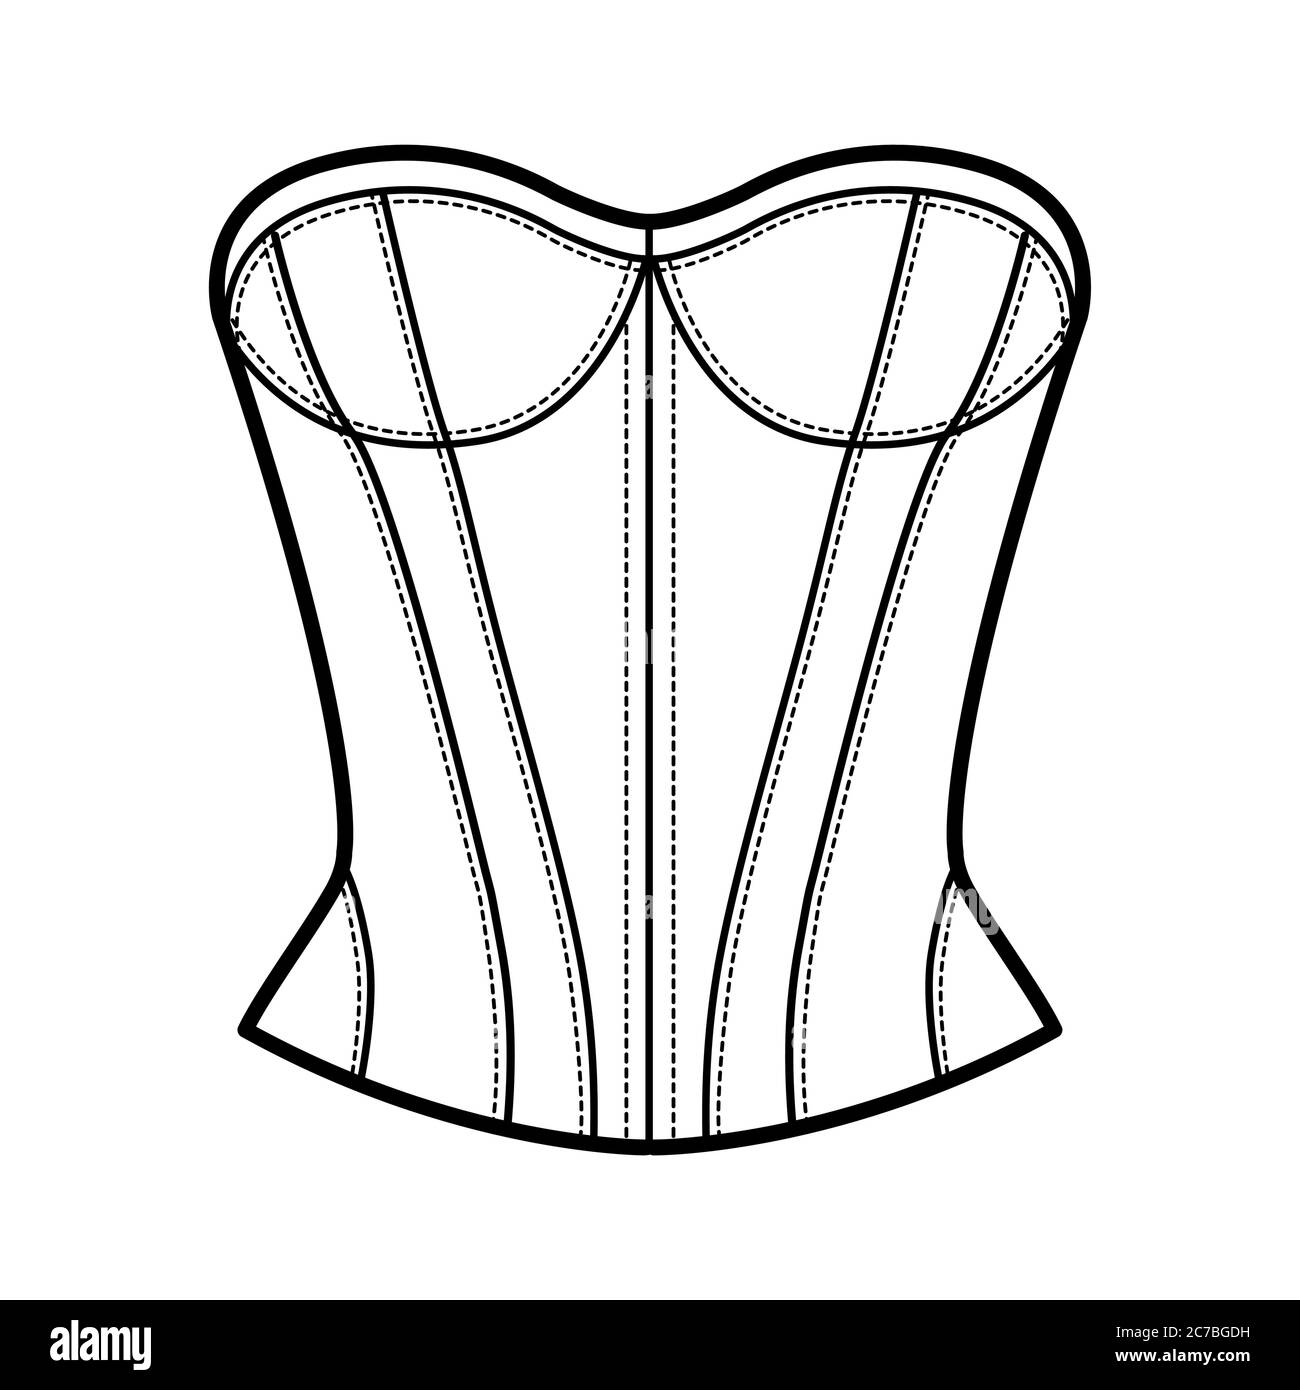 Corset-style top technical fashion illustration with fitted body